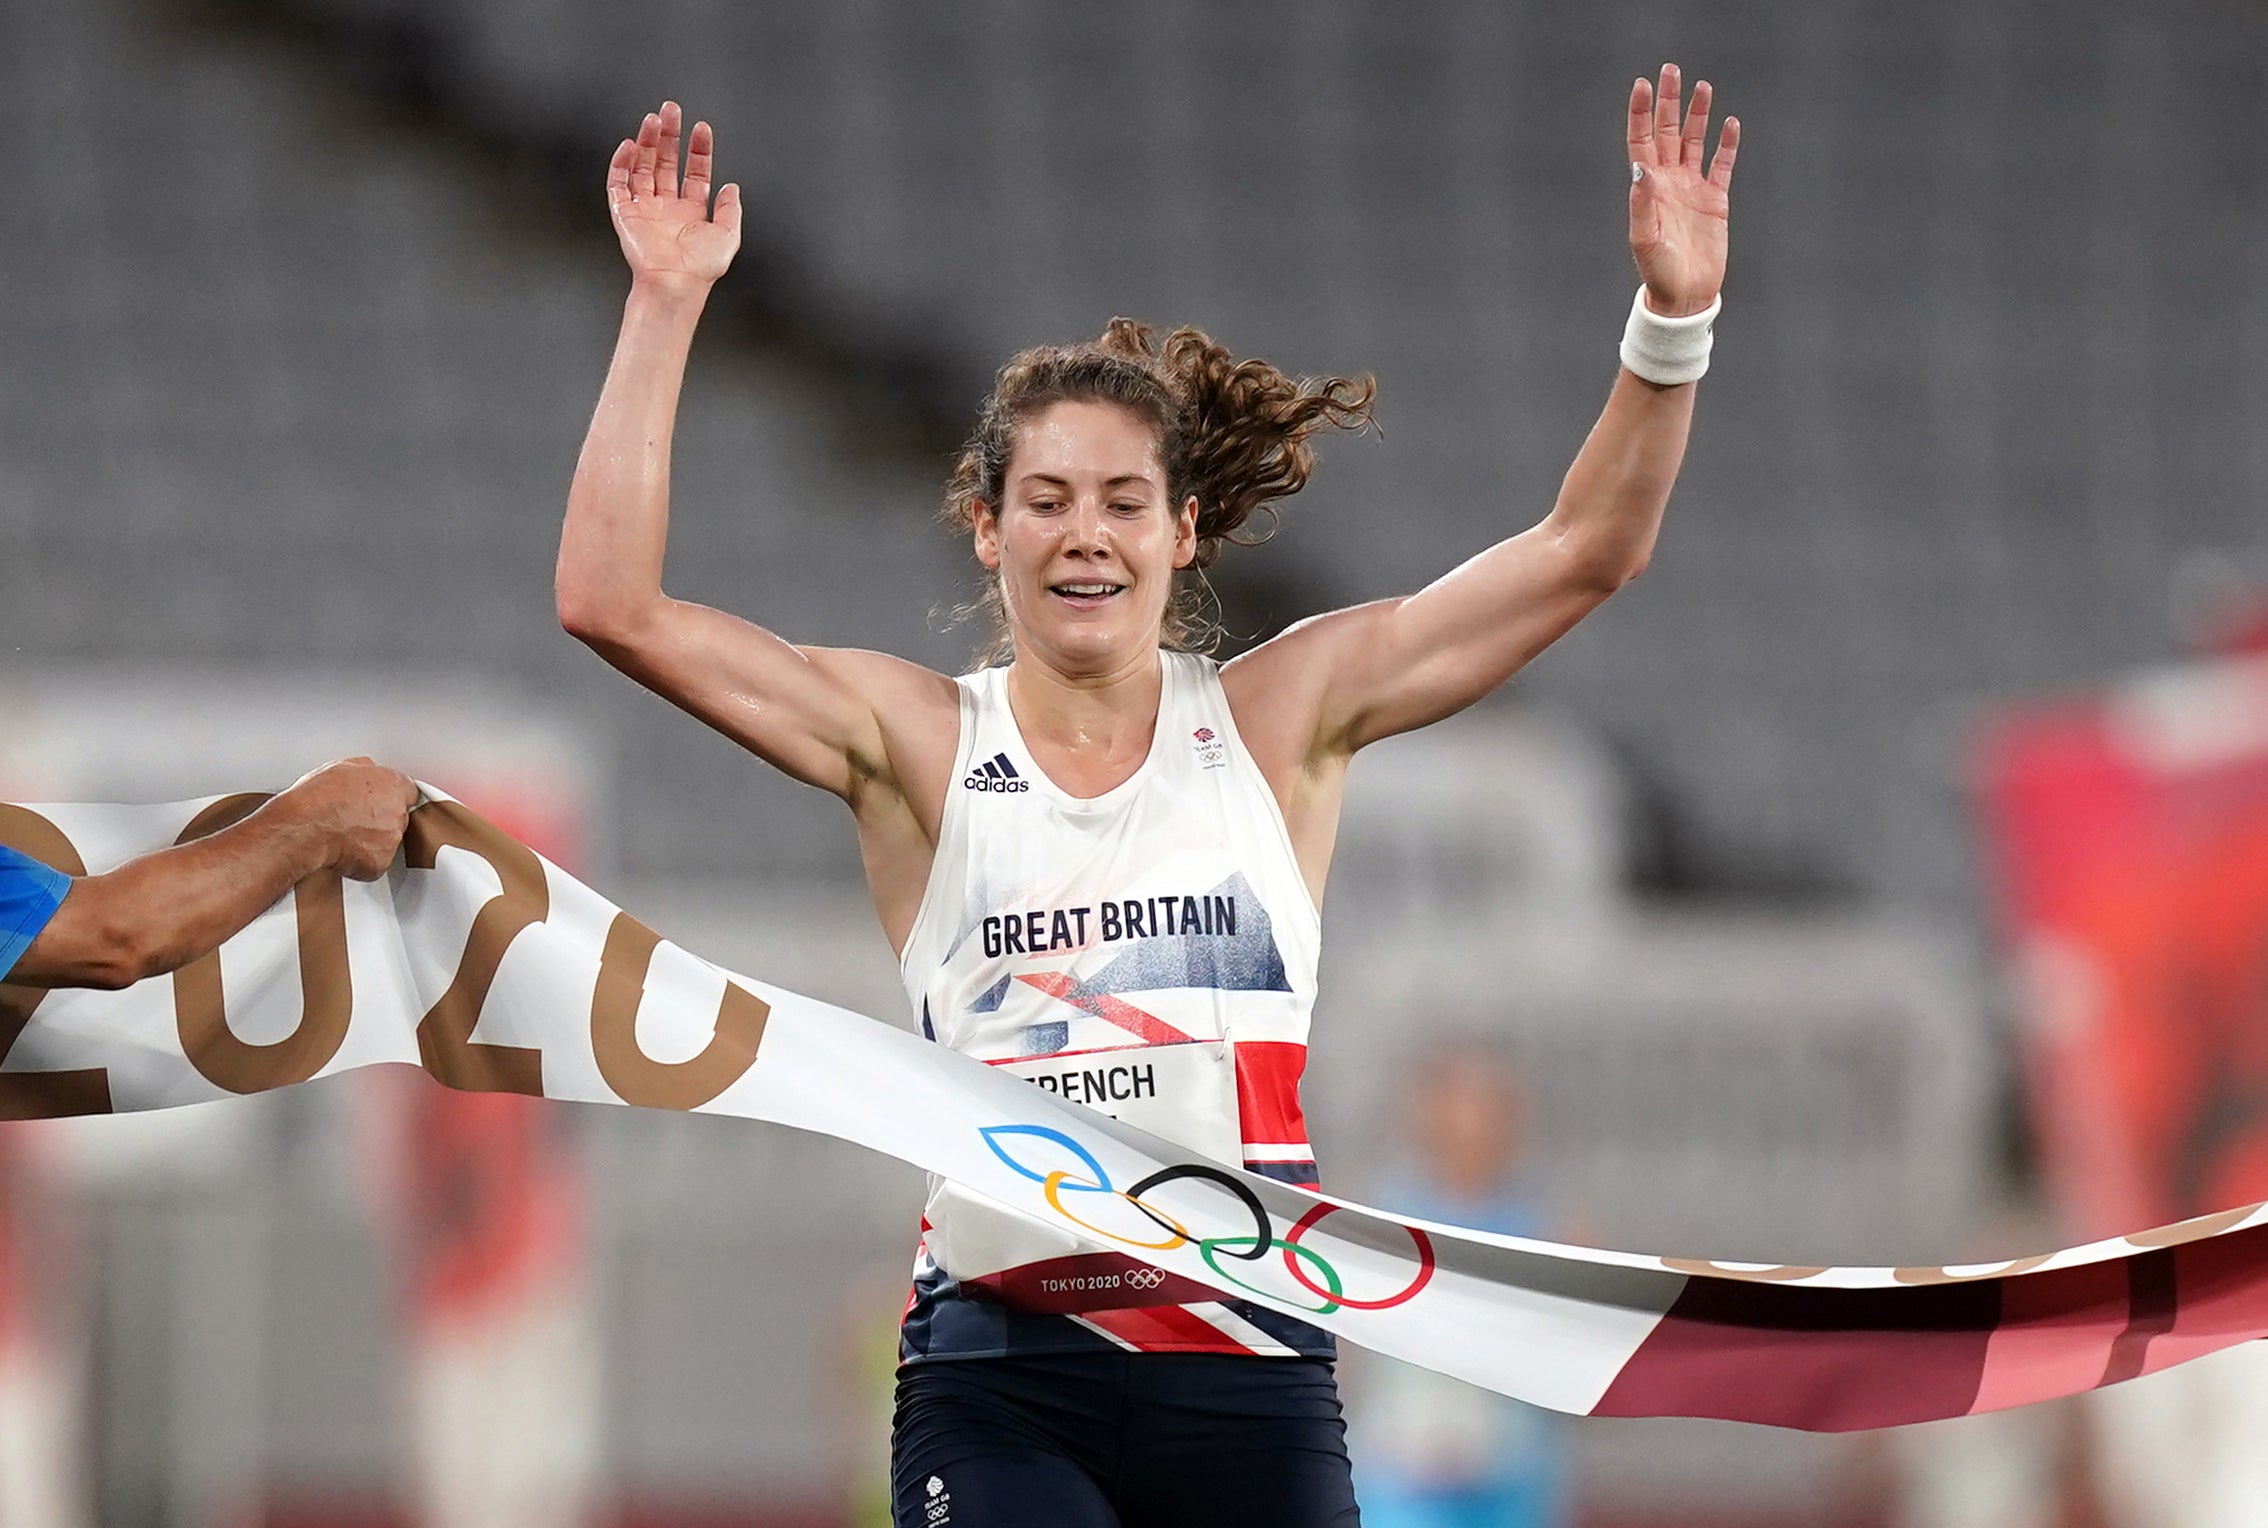 Great Britain’s Kate French wins gold in the Modern Pentathlon.